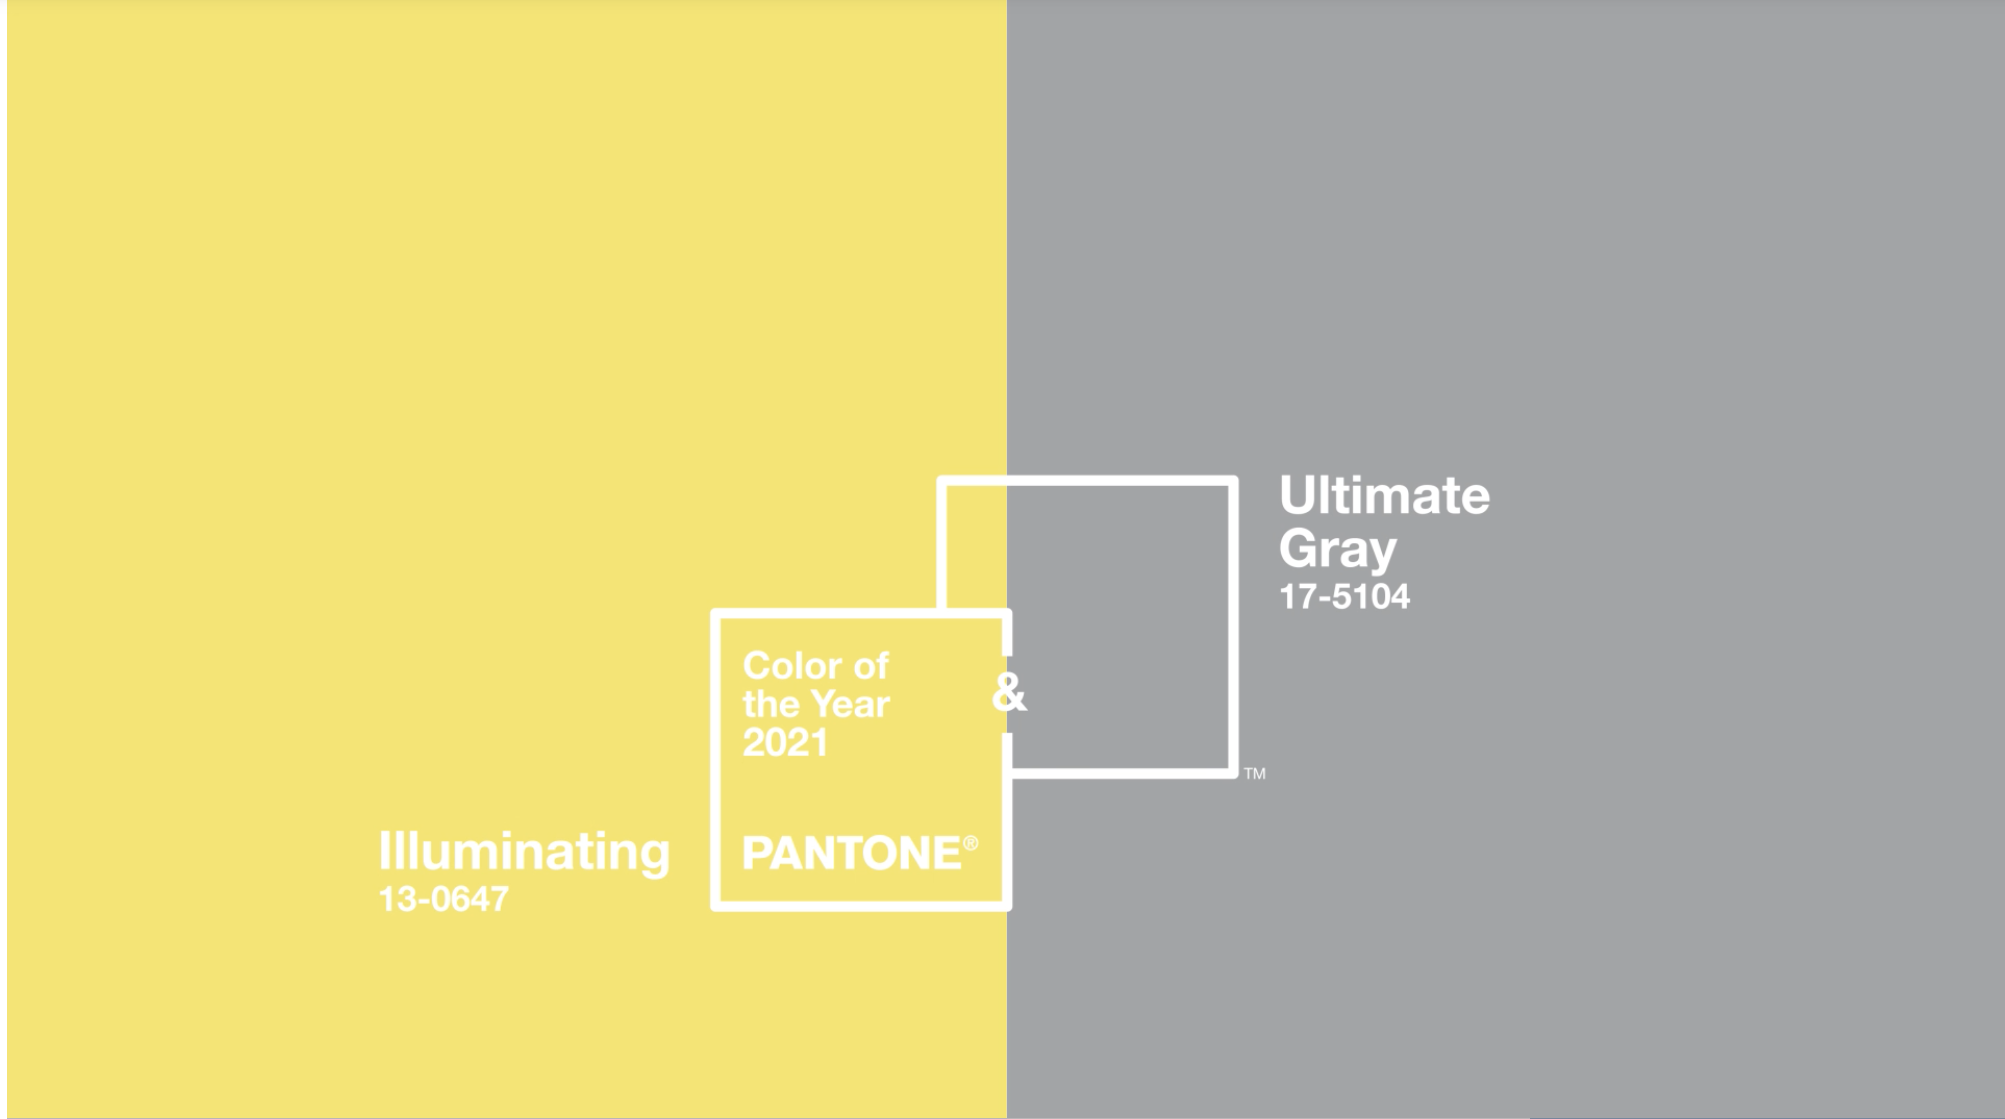 Pantone Colors of the Year 2021